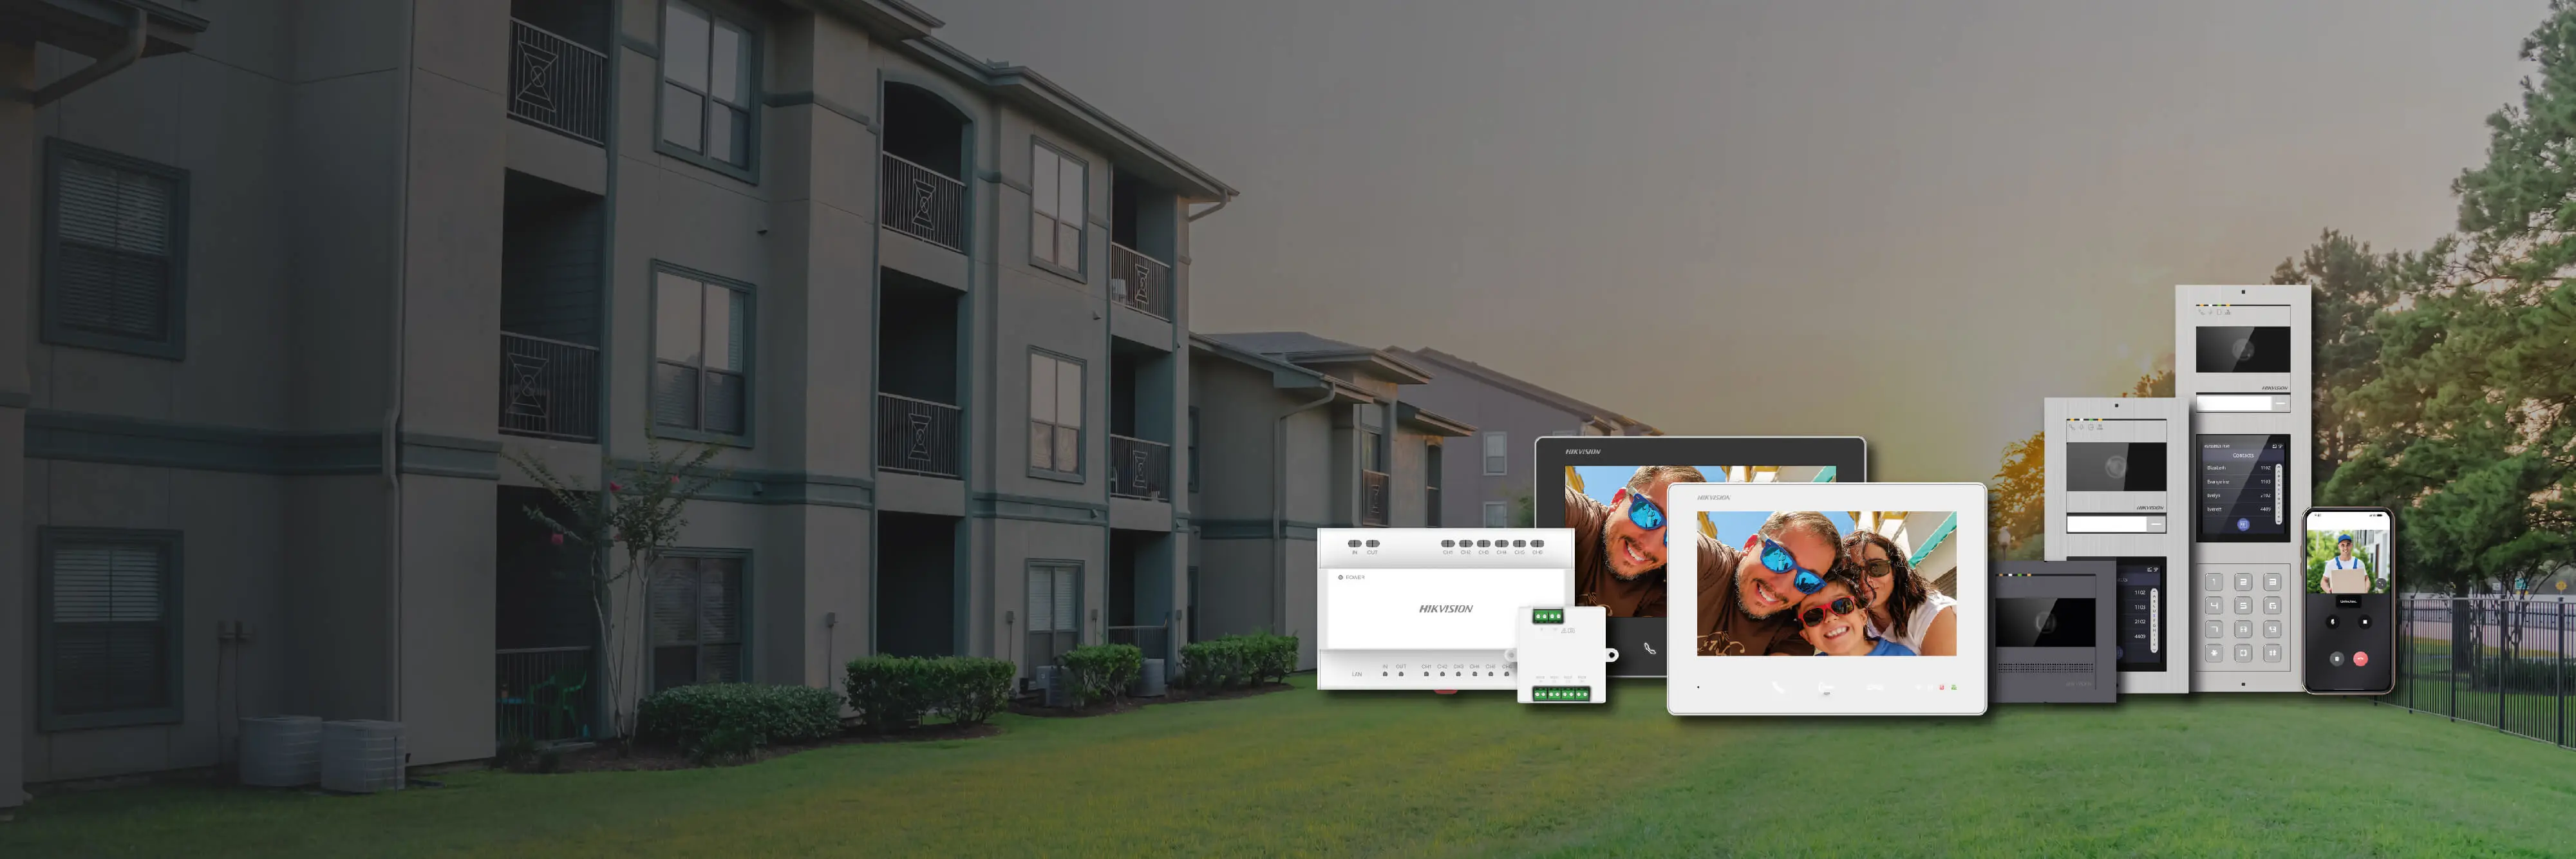 2 Wire HD Video Intercom
System for 
Apartment Buildings